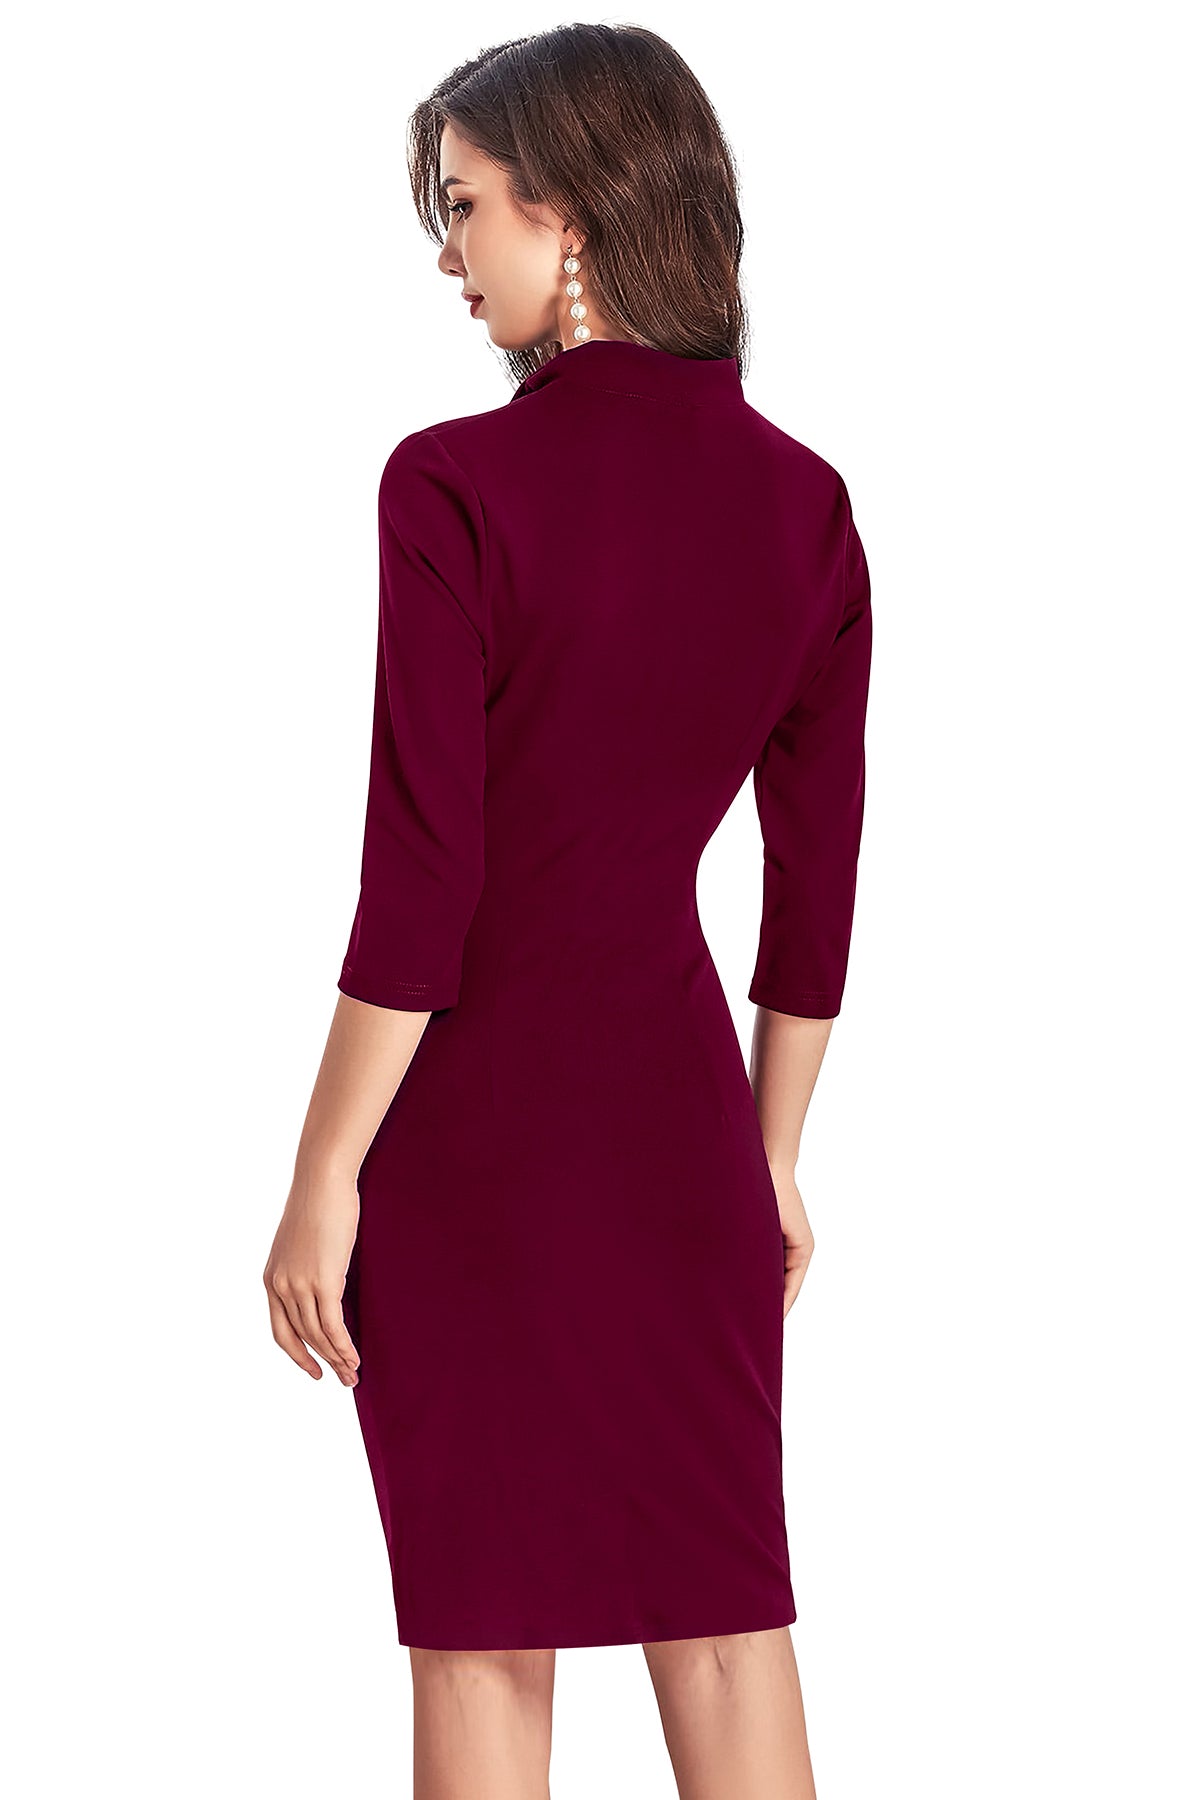 Women’s Bodycon Slim fit with Long Sleeves Dress,